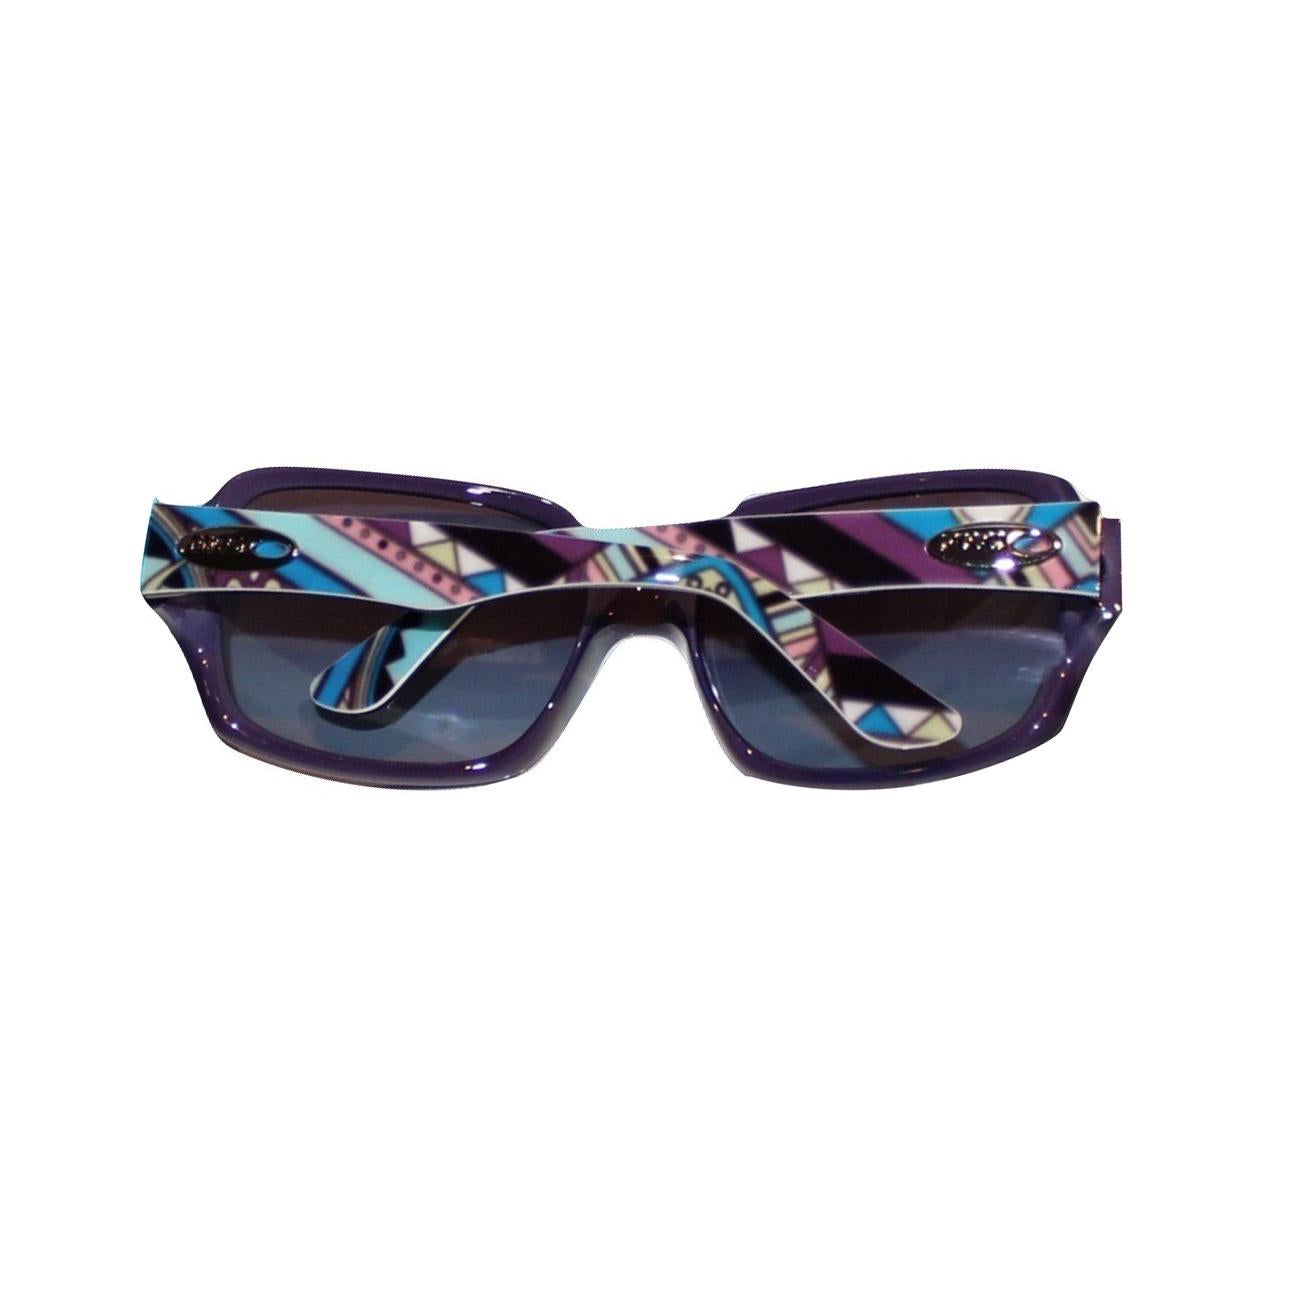 Emilio Pucci Sunglasses
Brand New
* Stunning Classic Pucci Sunglasses
* Deep Purple Front & Interior
* Classic Pucci Print on Sides
* No Two Sides are Alike!
* Silver Pucci Logo on Both Sides
* Handmade ZYL in Italy
* 100% UV Protection
* Comes with